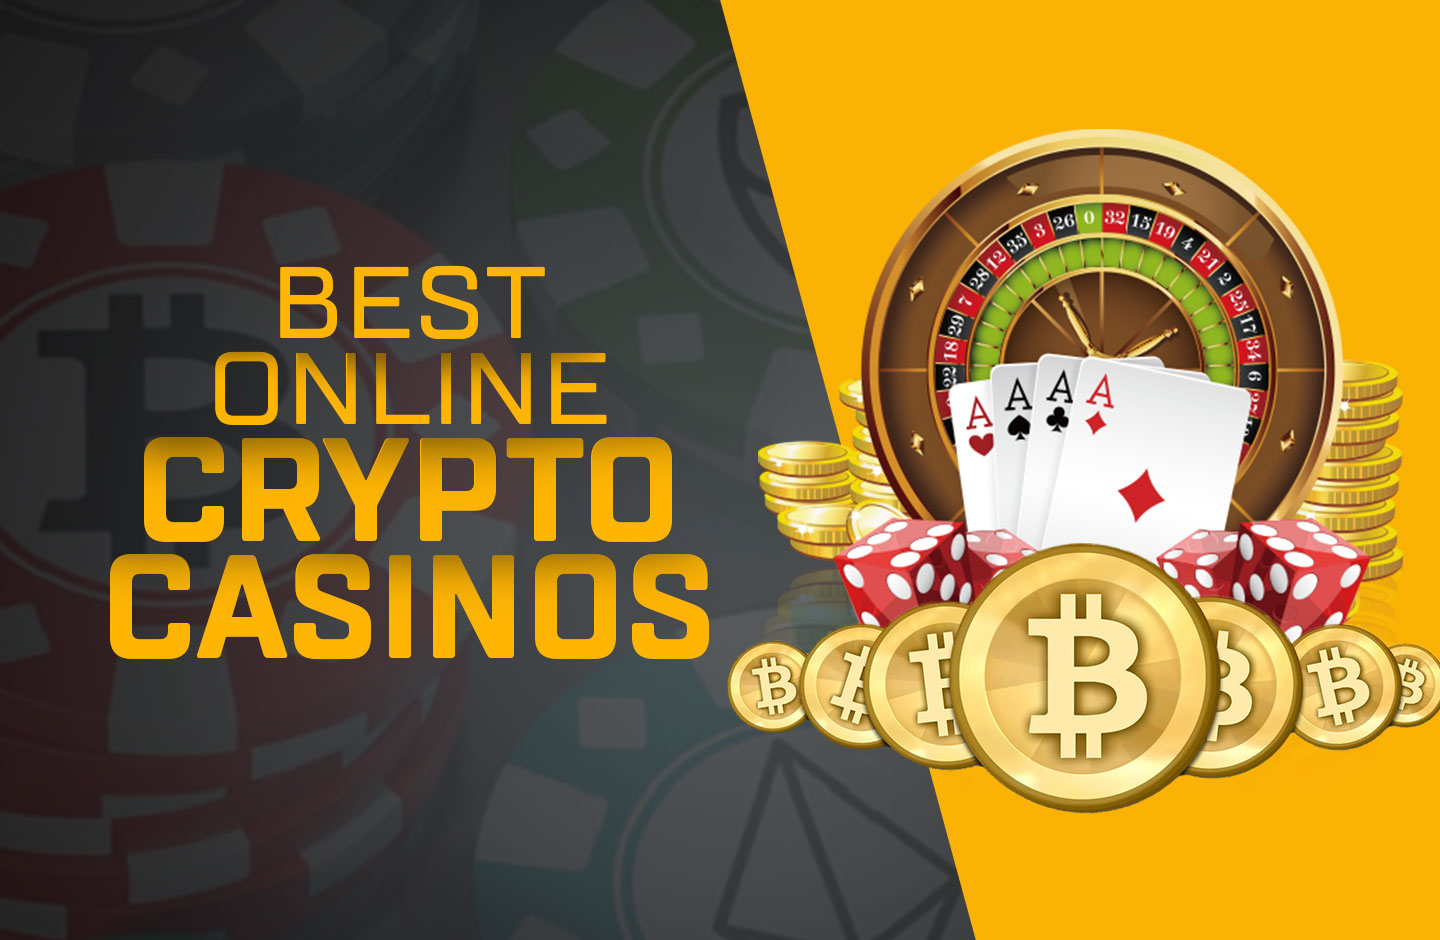 Master The Art Of bitcoin casino sites With These 3 Tips